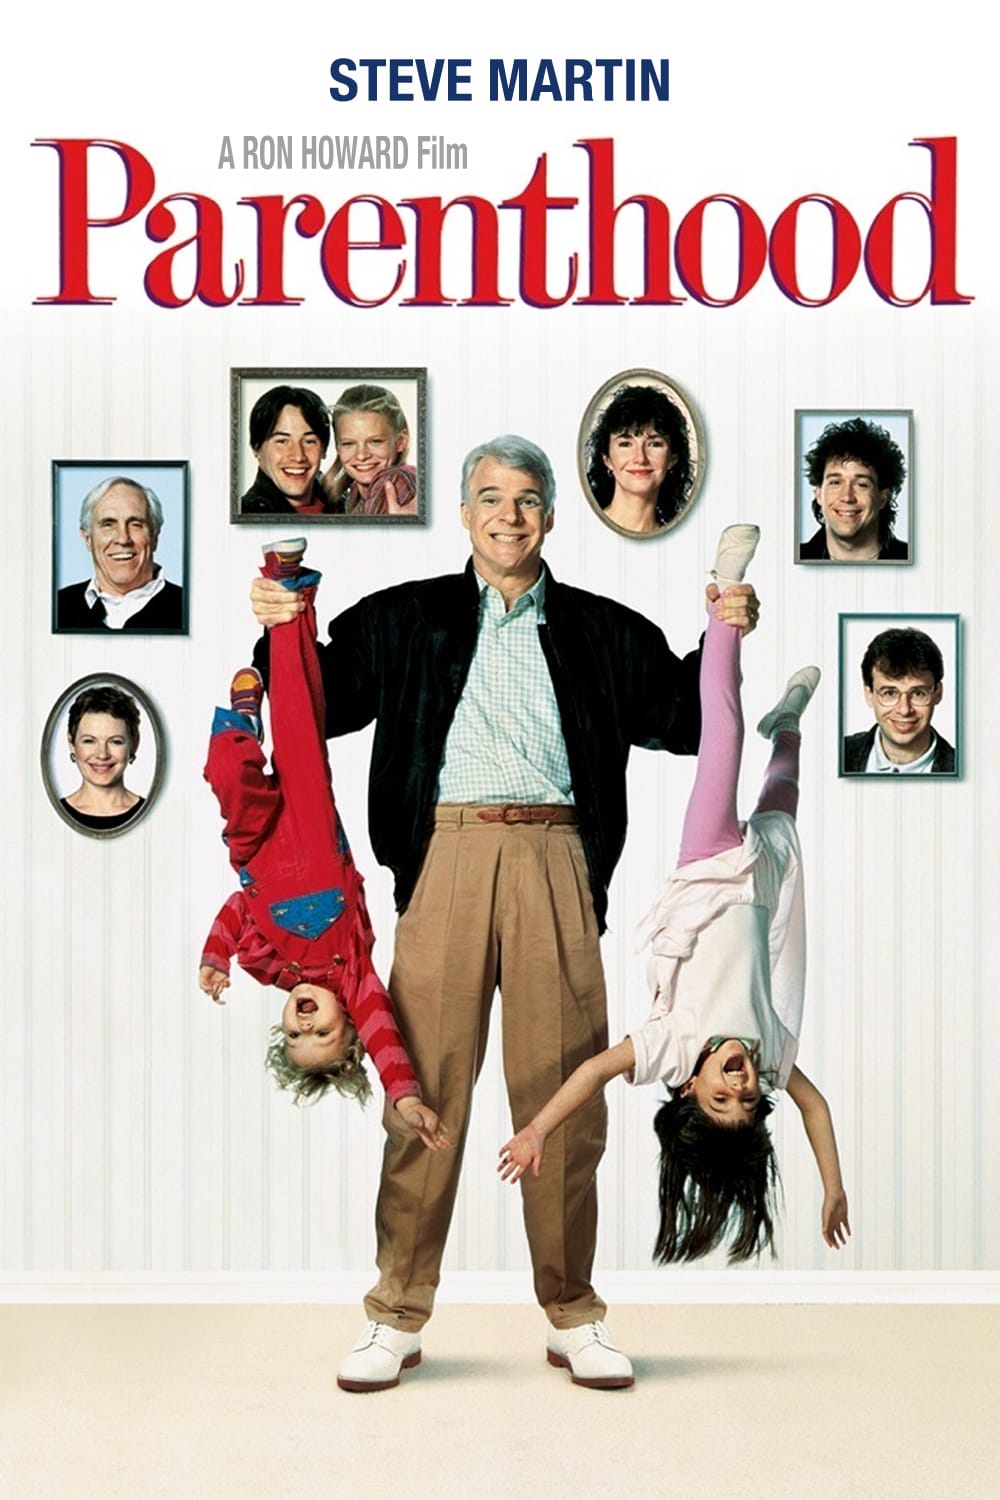 Poster for the movie "Parenthood"